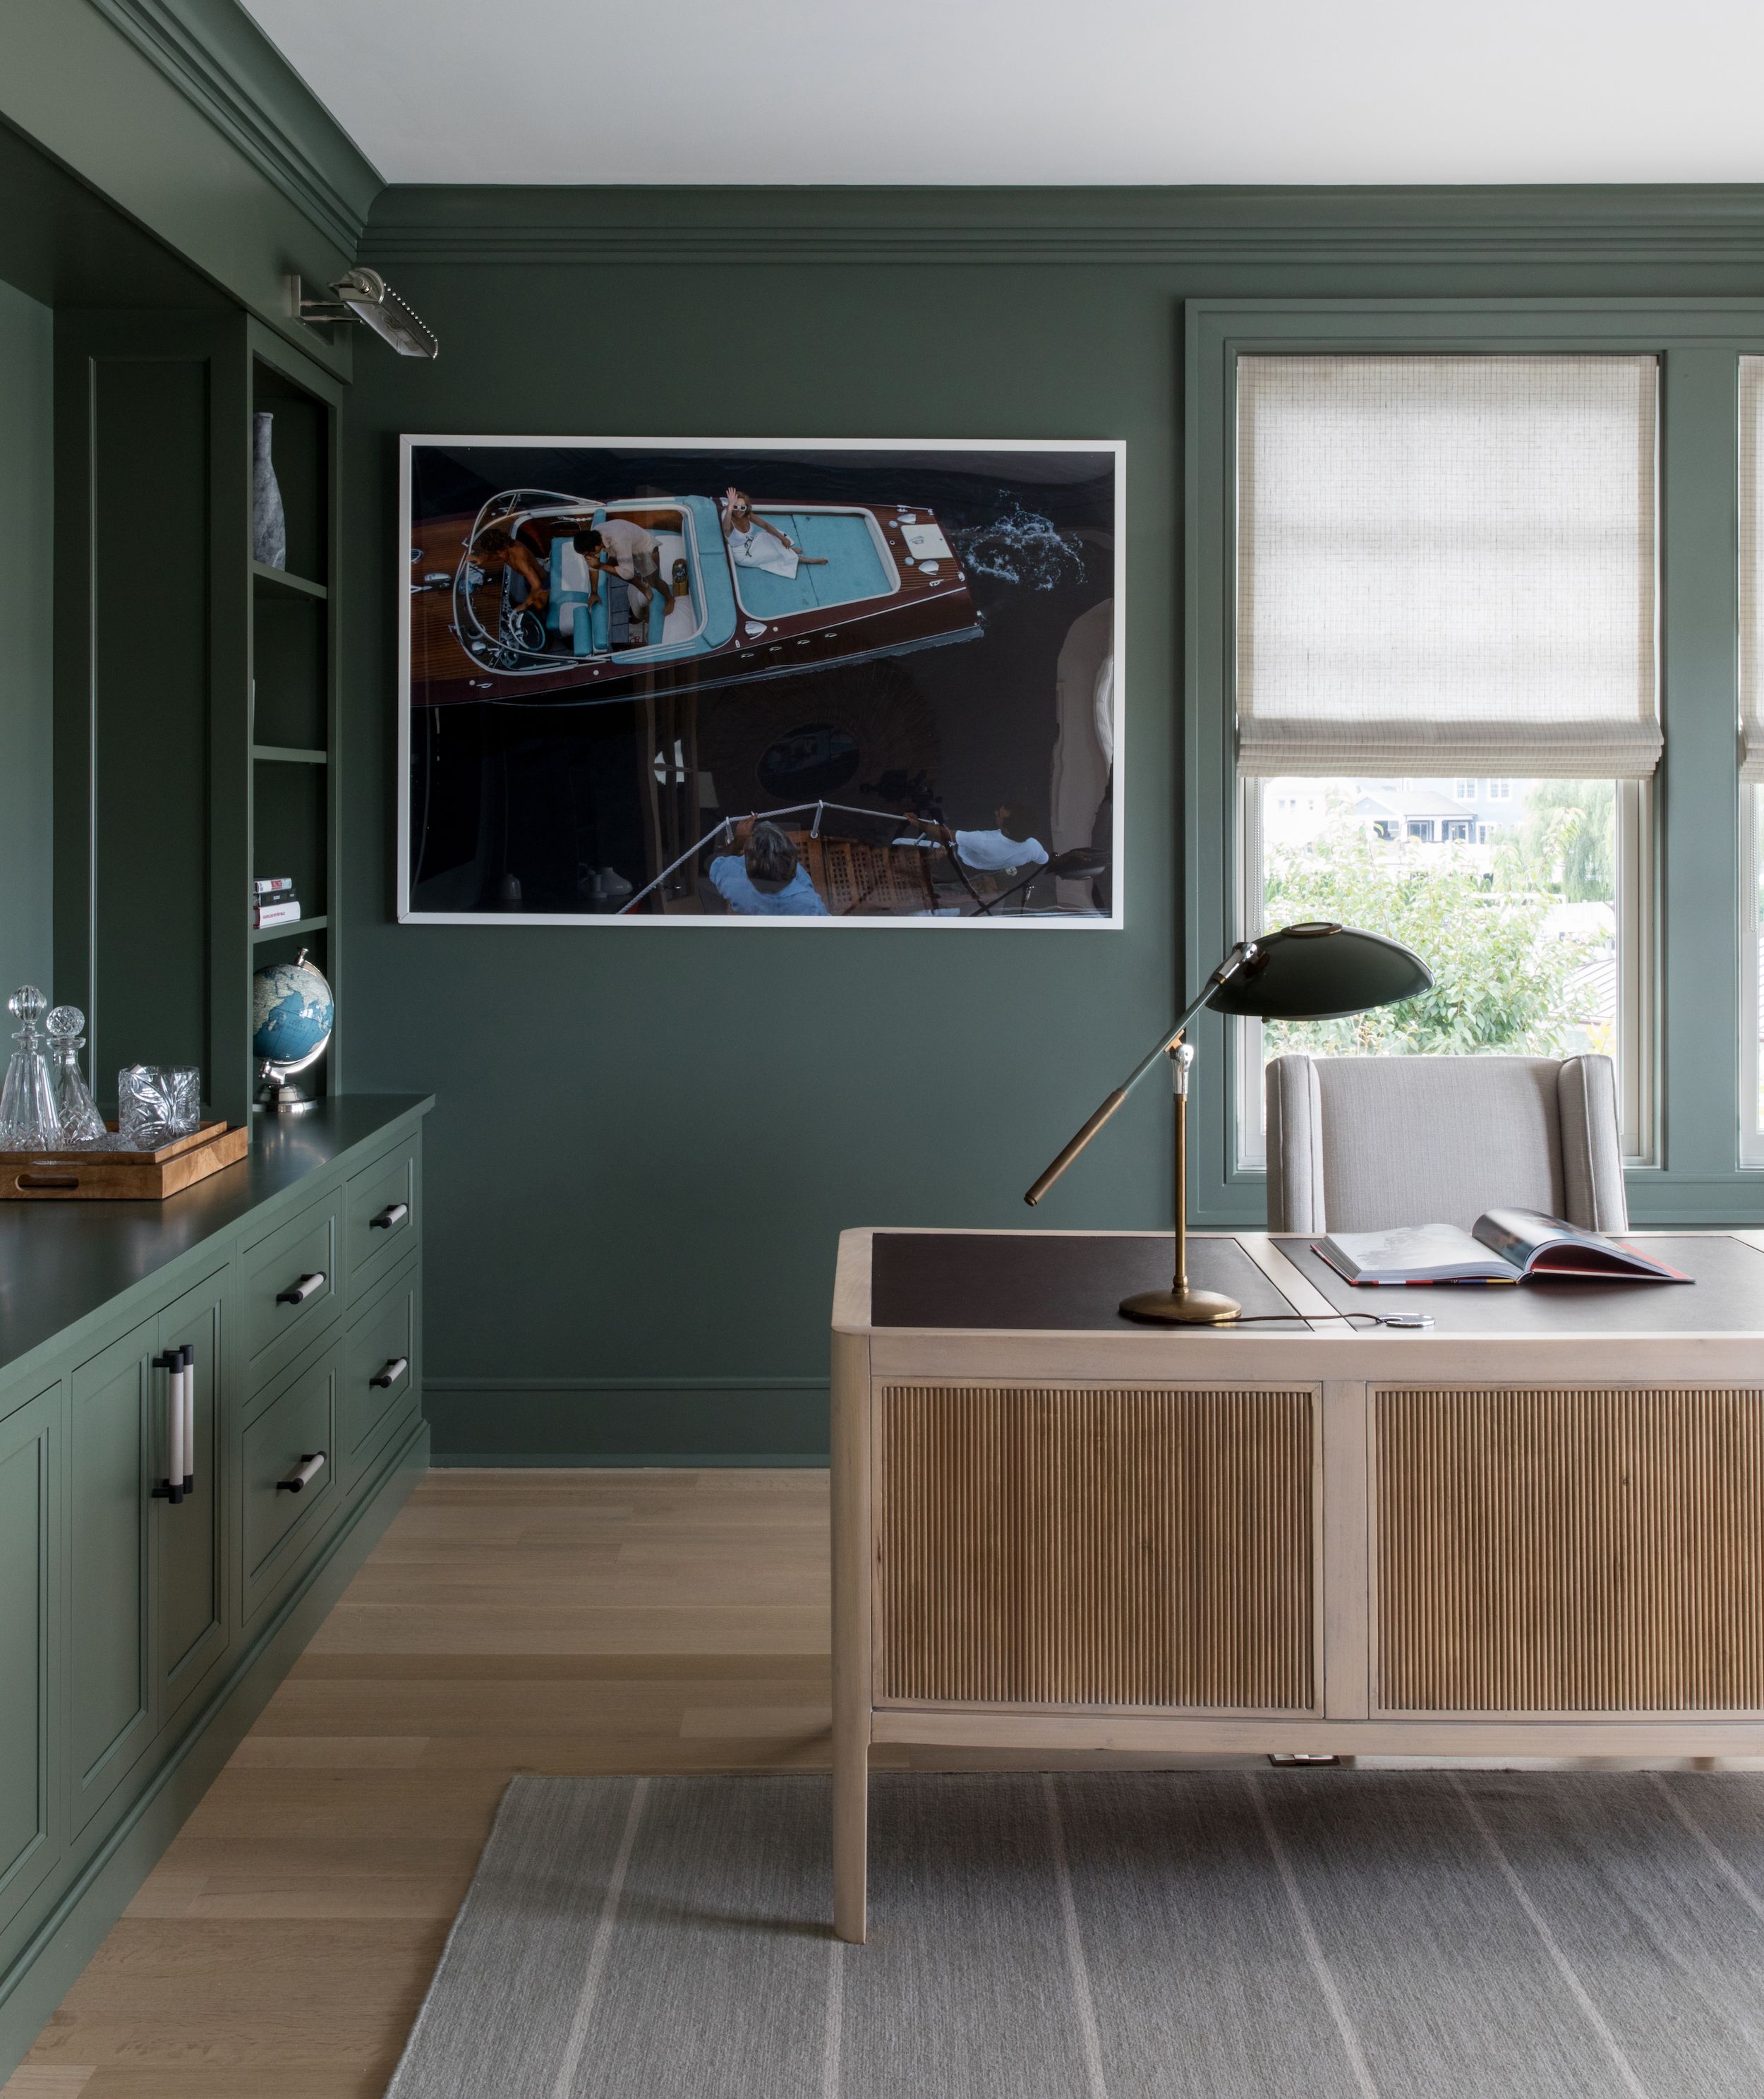 Shades of Green: Best Paint Colors for Olive, Sage, Mint, and More